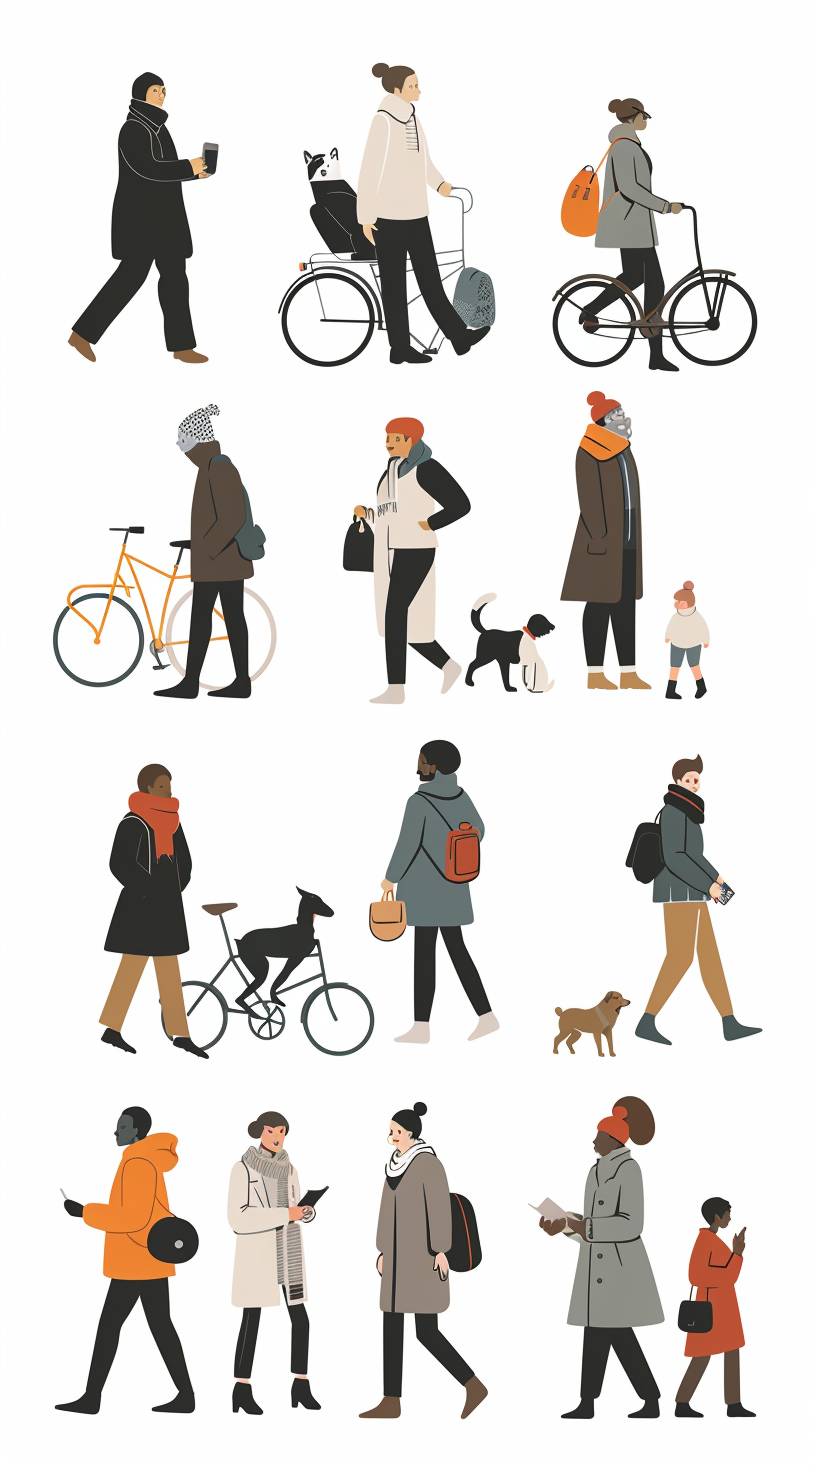 A flat illustration of people in various activities, such as walking with a stocado and dog, riding bicycles or reading books. The people should be diverse in age, gender and skin tone. The background is white to highlight the characters and their actions. There is no text on it so that attention can focus only on the human figures. A single color scheme for all elements would make them stand out more clearly against each other. In the style of flat design and minimalist design.